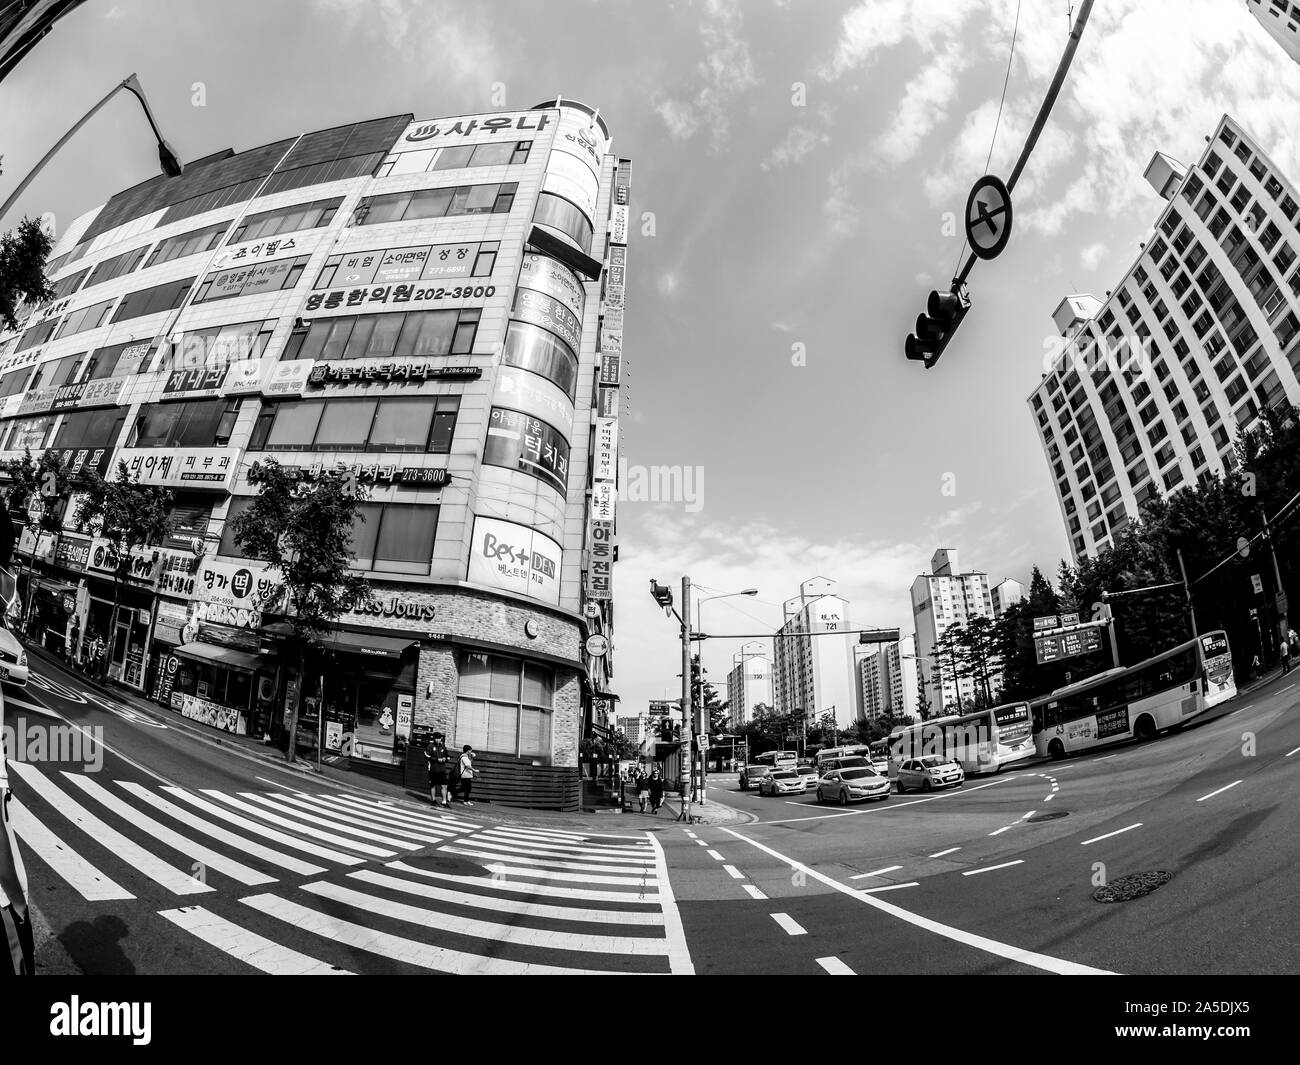 Seoul, South Korea - June 2, 2017: Pedestrians stopping at pedestrian crossing and waiting green sign of traffic light in the central street in Seoul. Stock Photo